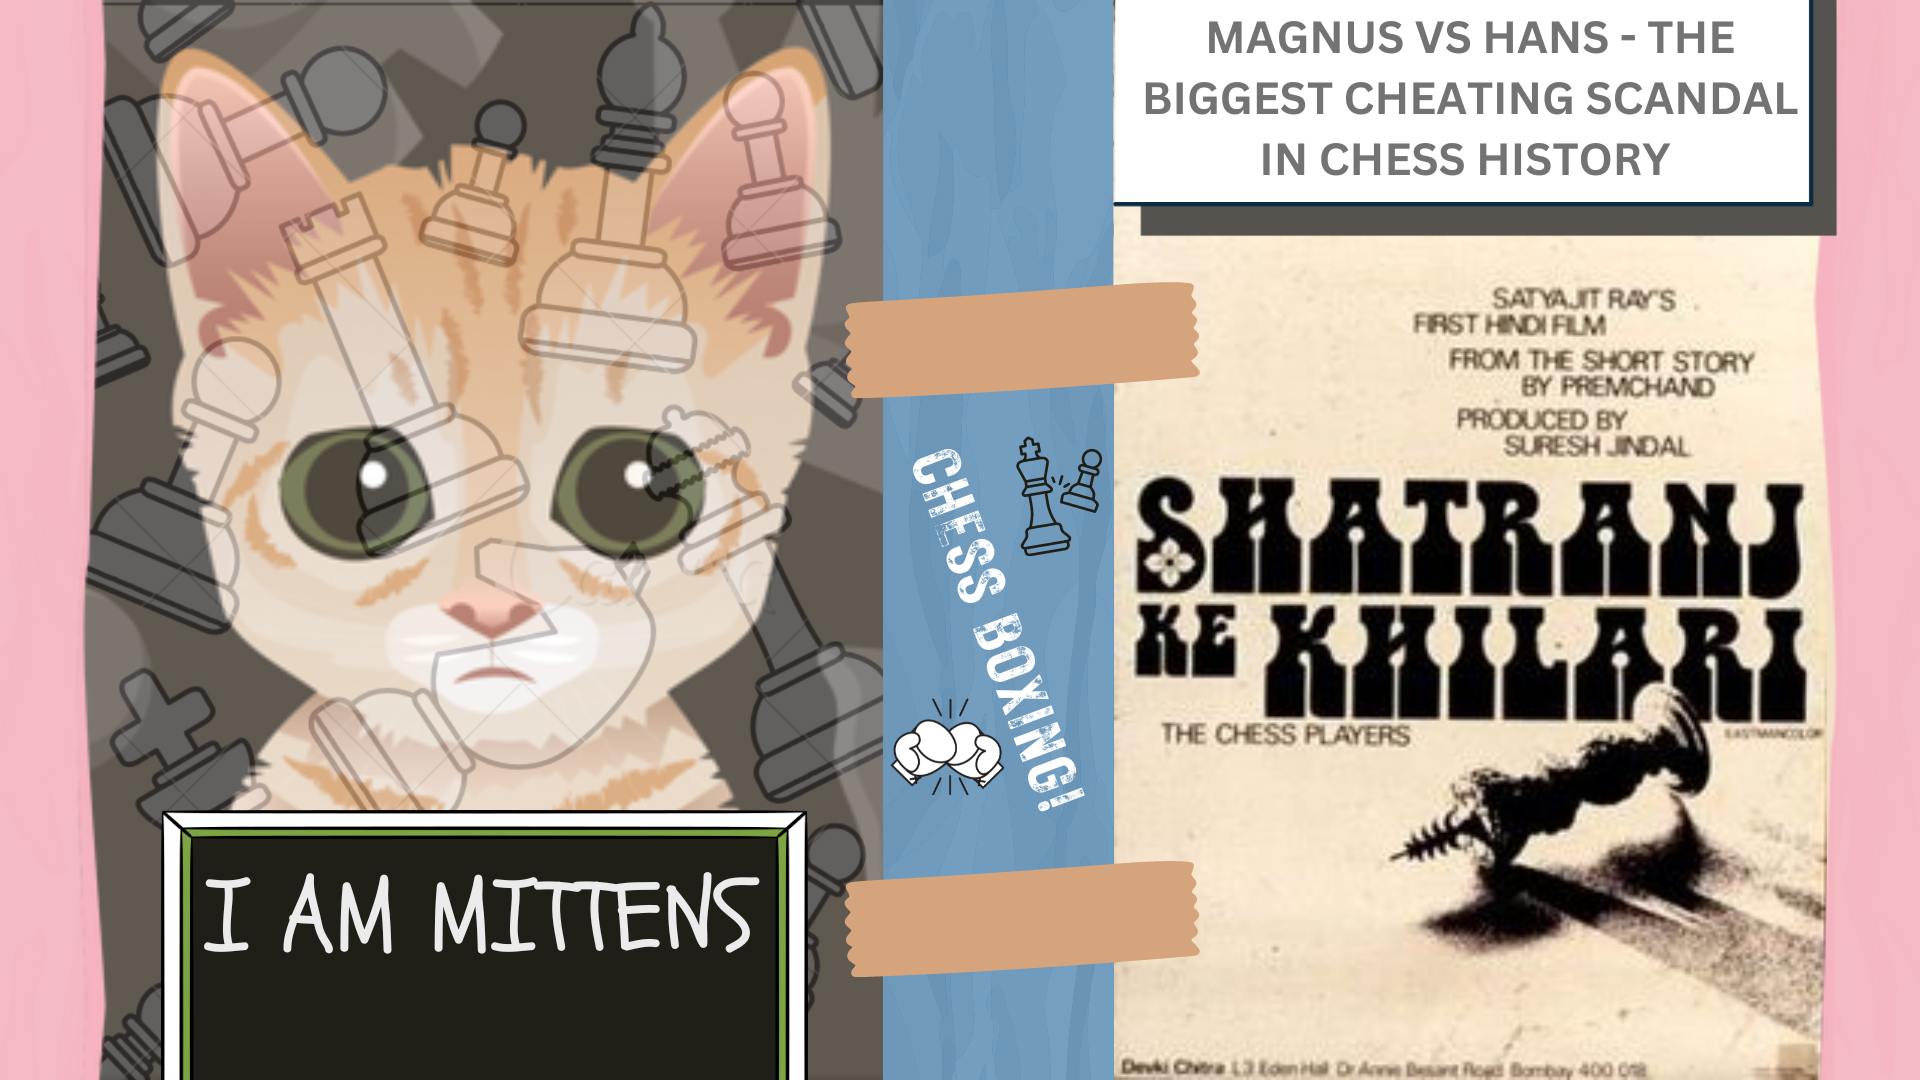 GM Bok, first human to beat mittens without using an engine? : r/chess